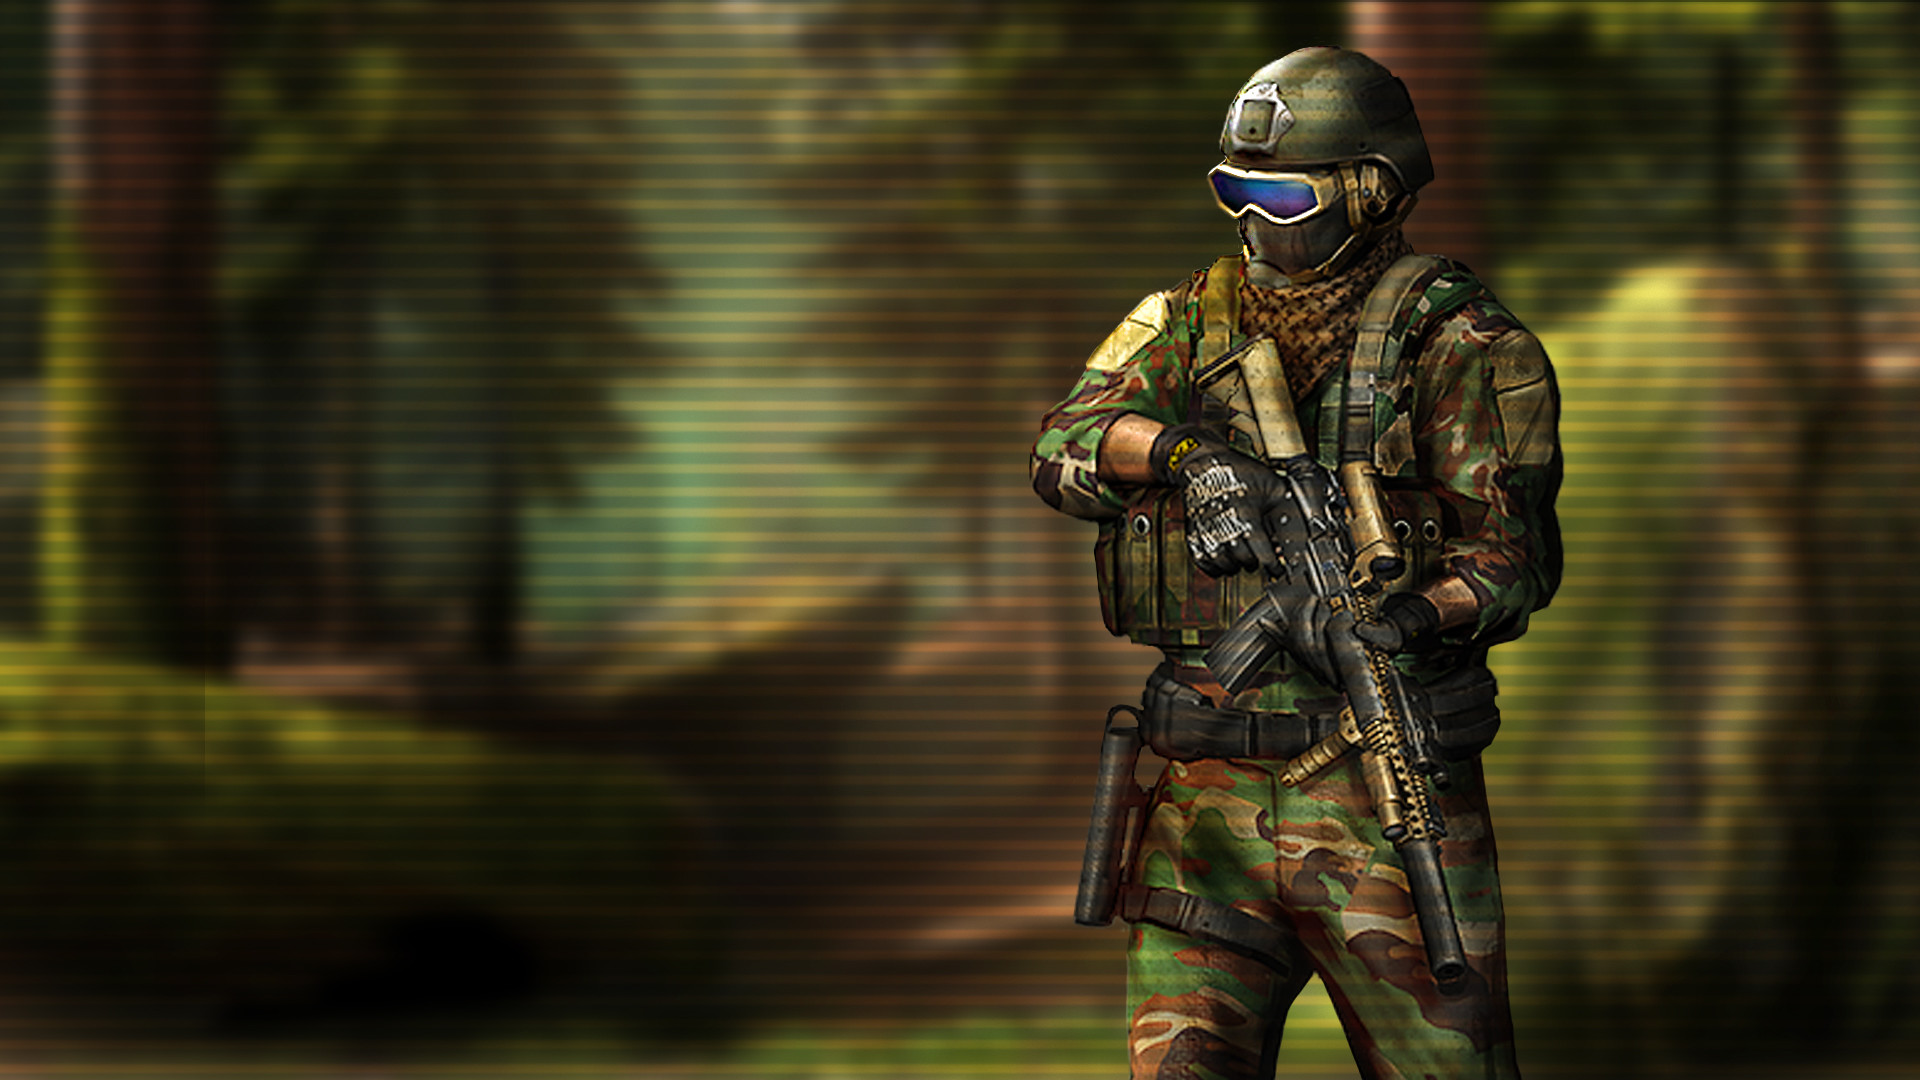 1920x1080 Breach & Clear - US Army Special Forces | Steam Trading Cards Wiki | FANDOM  powered by Wikia